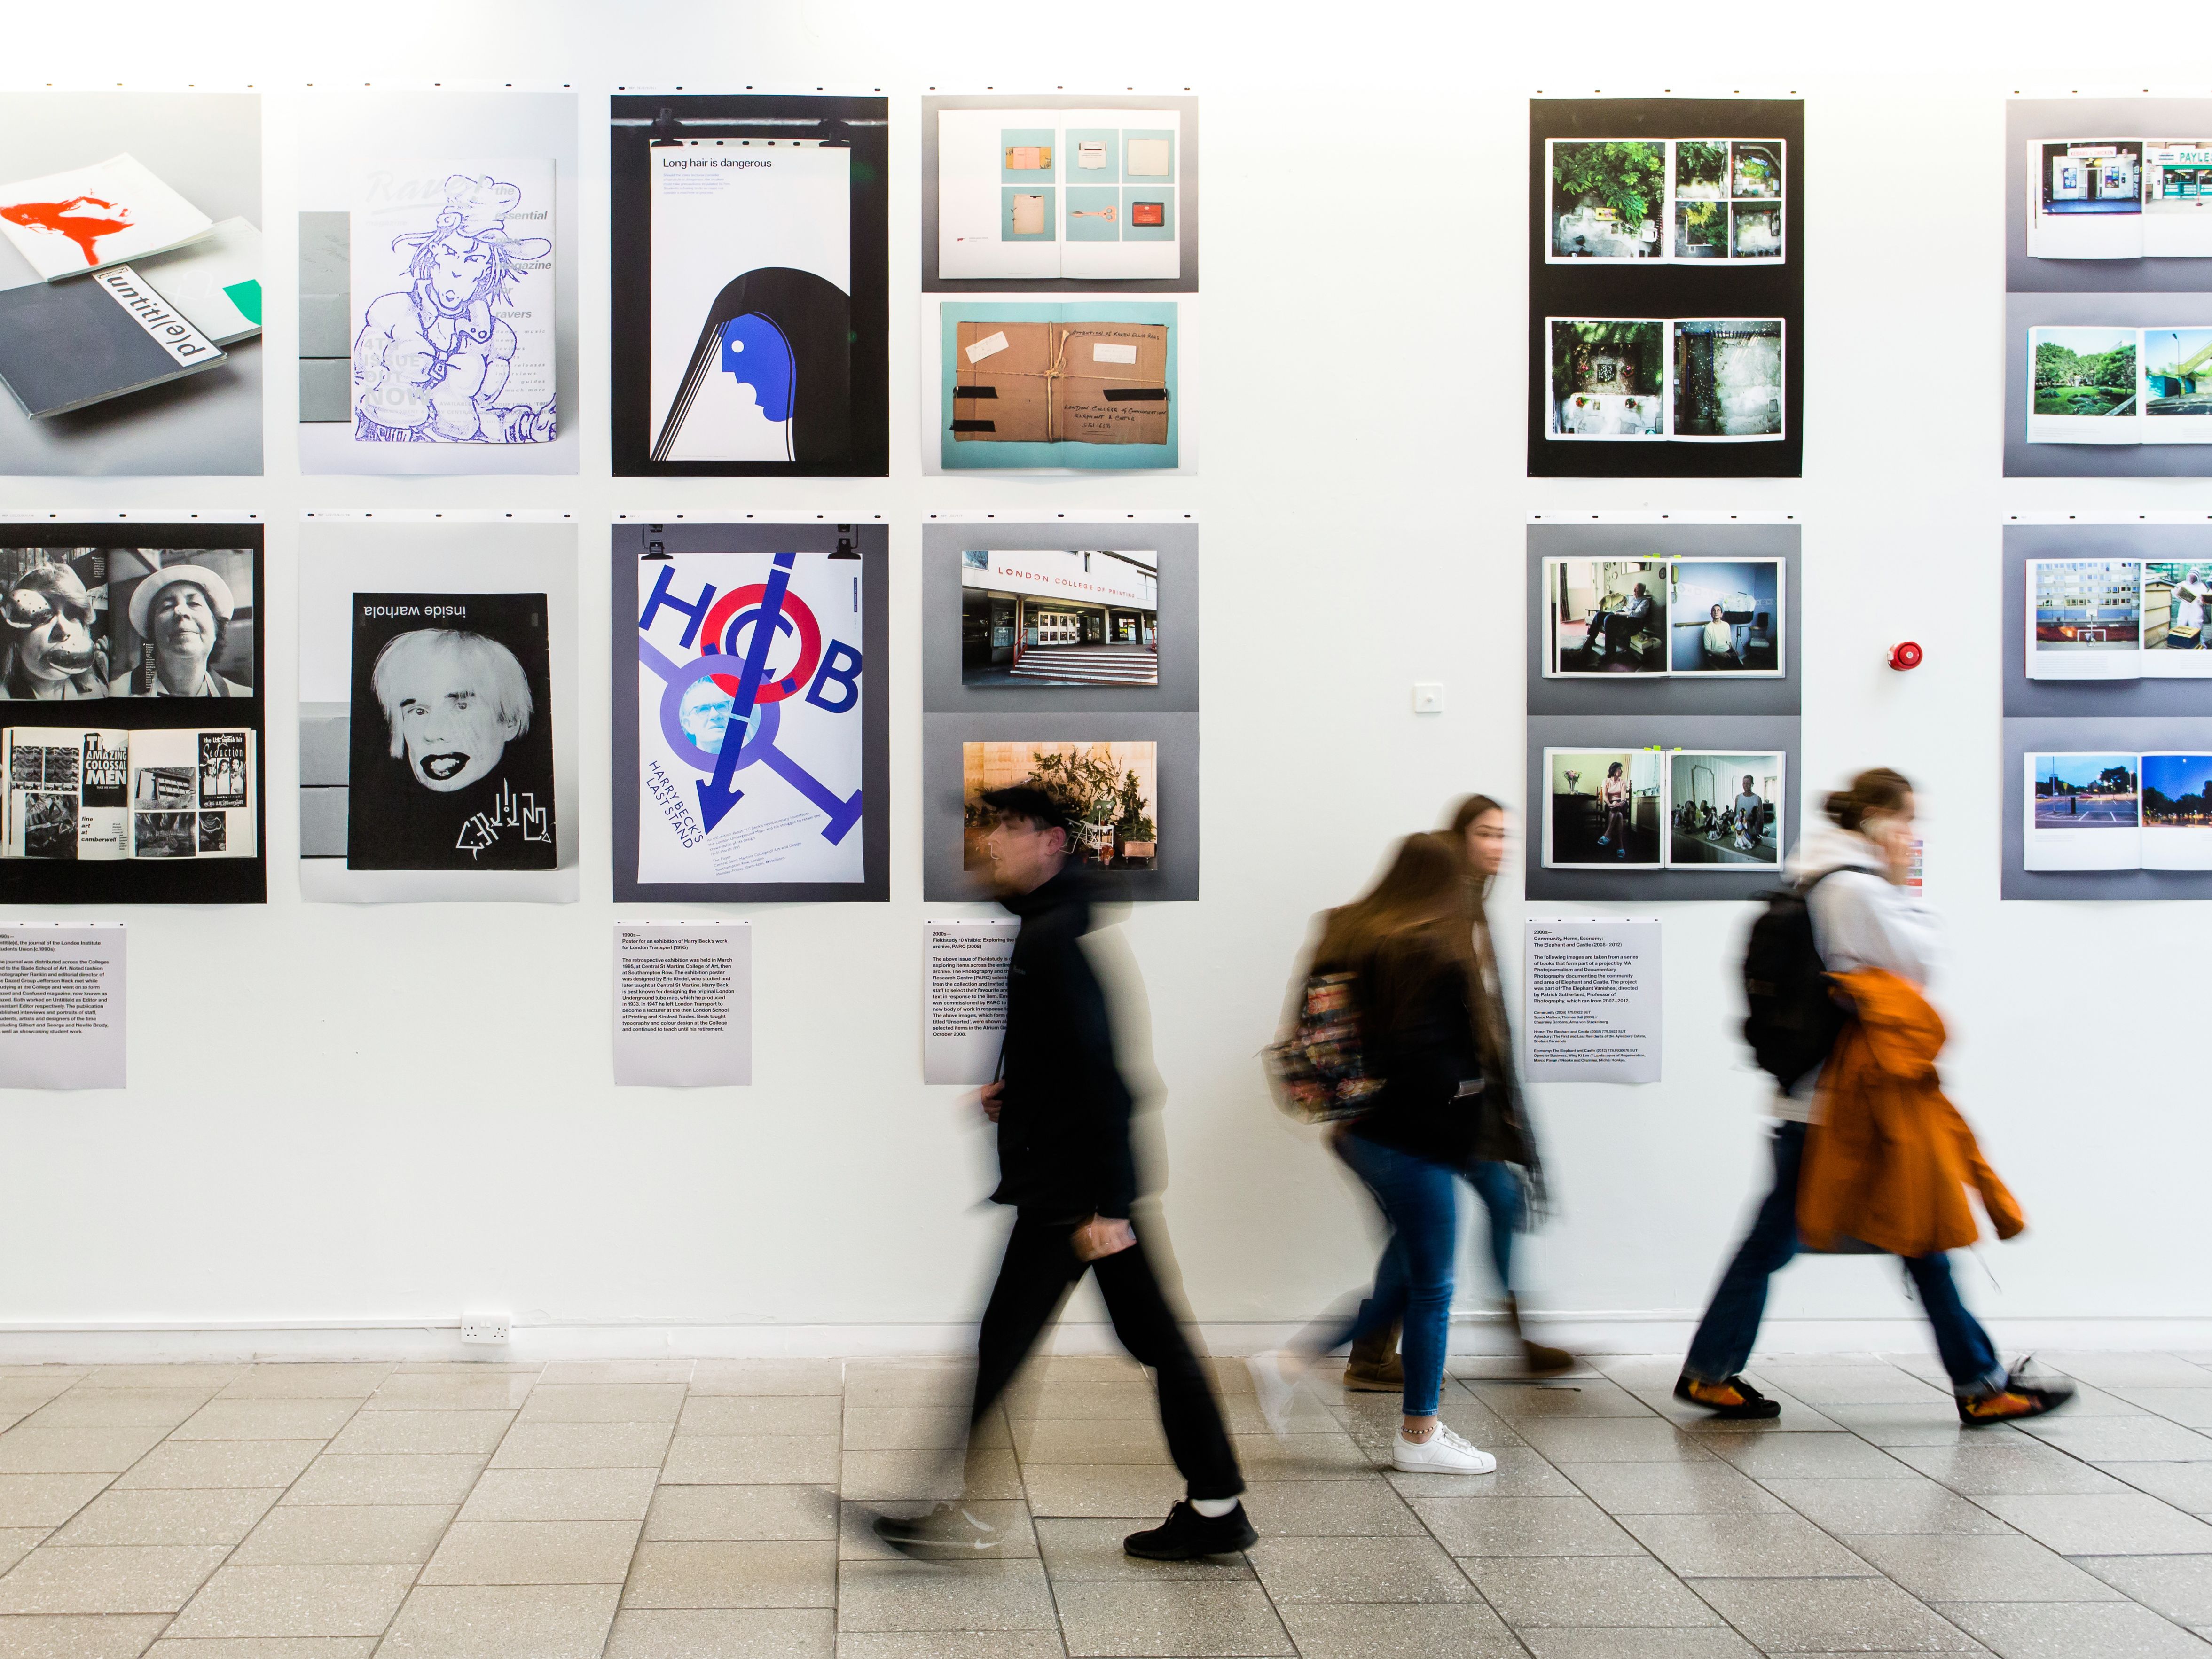 People walking past an exhibition wall, with their movement blurred.